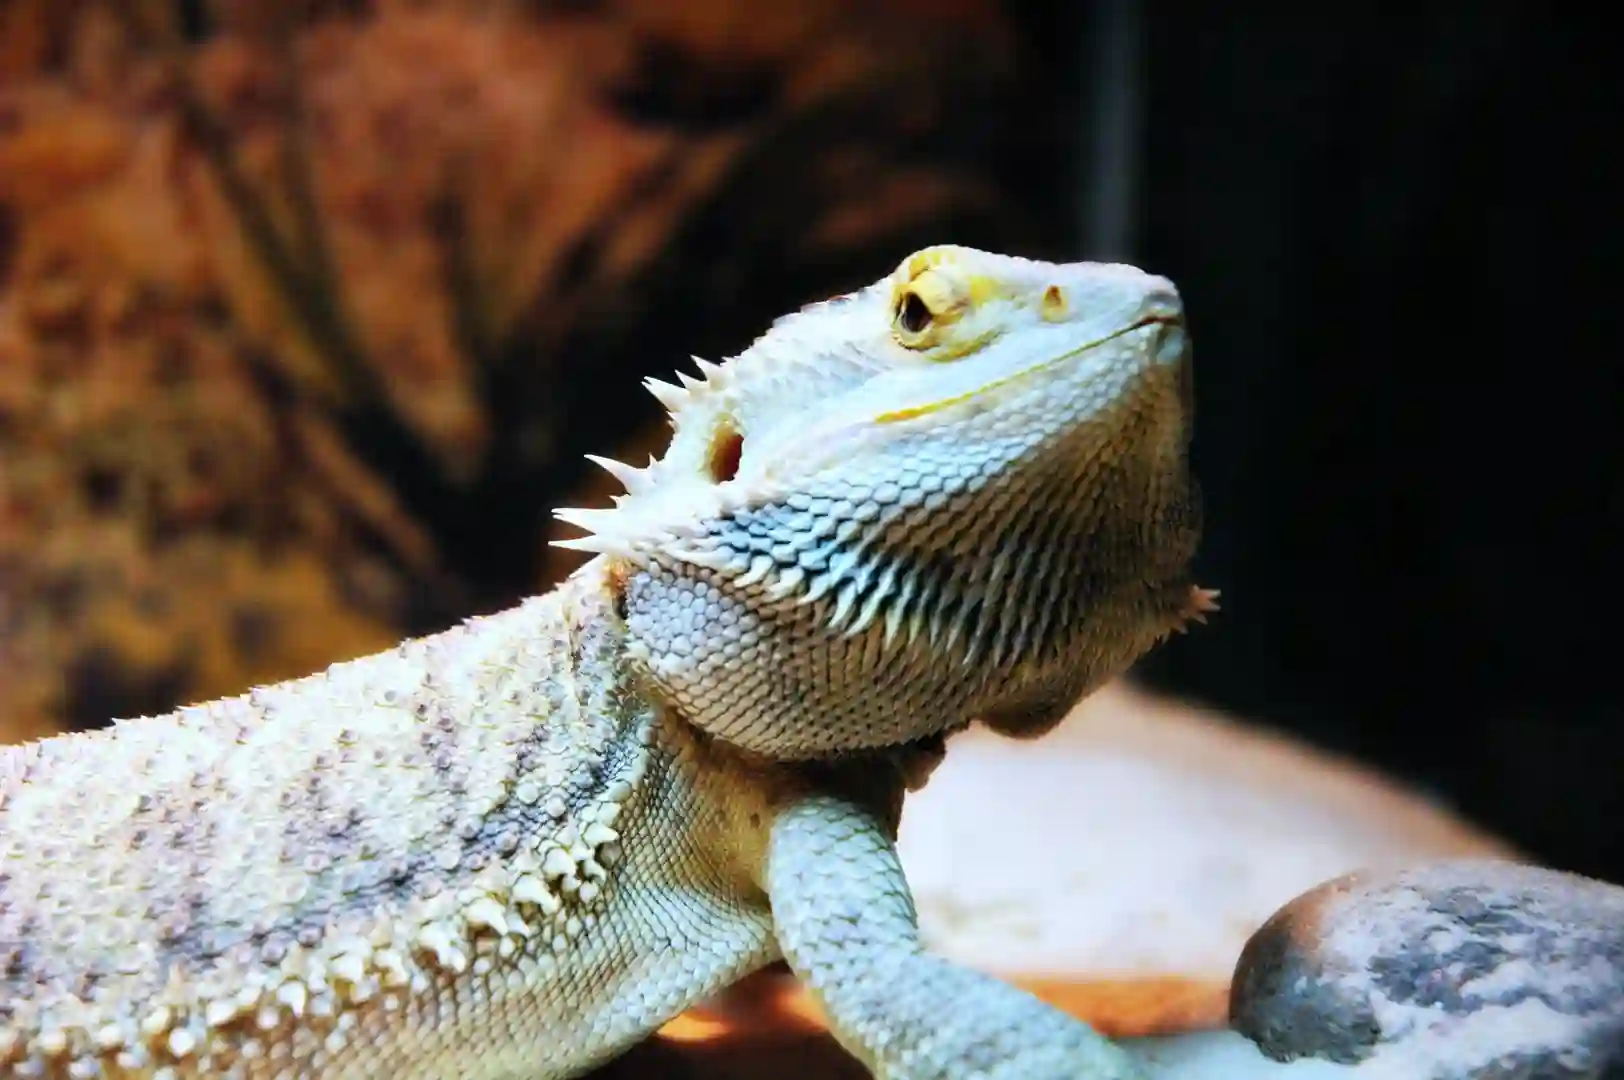 Can Bearded Dragons Eat Broccoli Rabe?